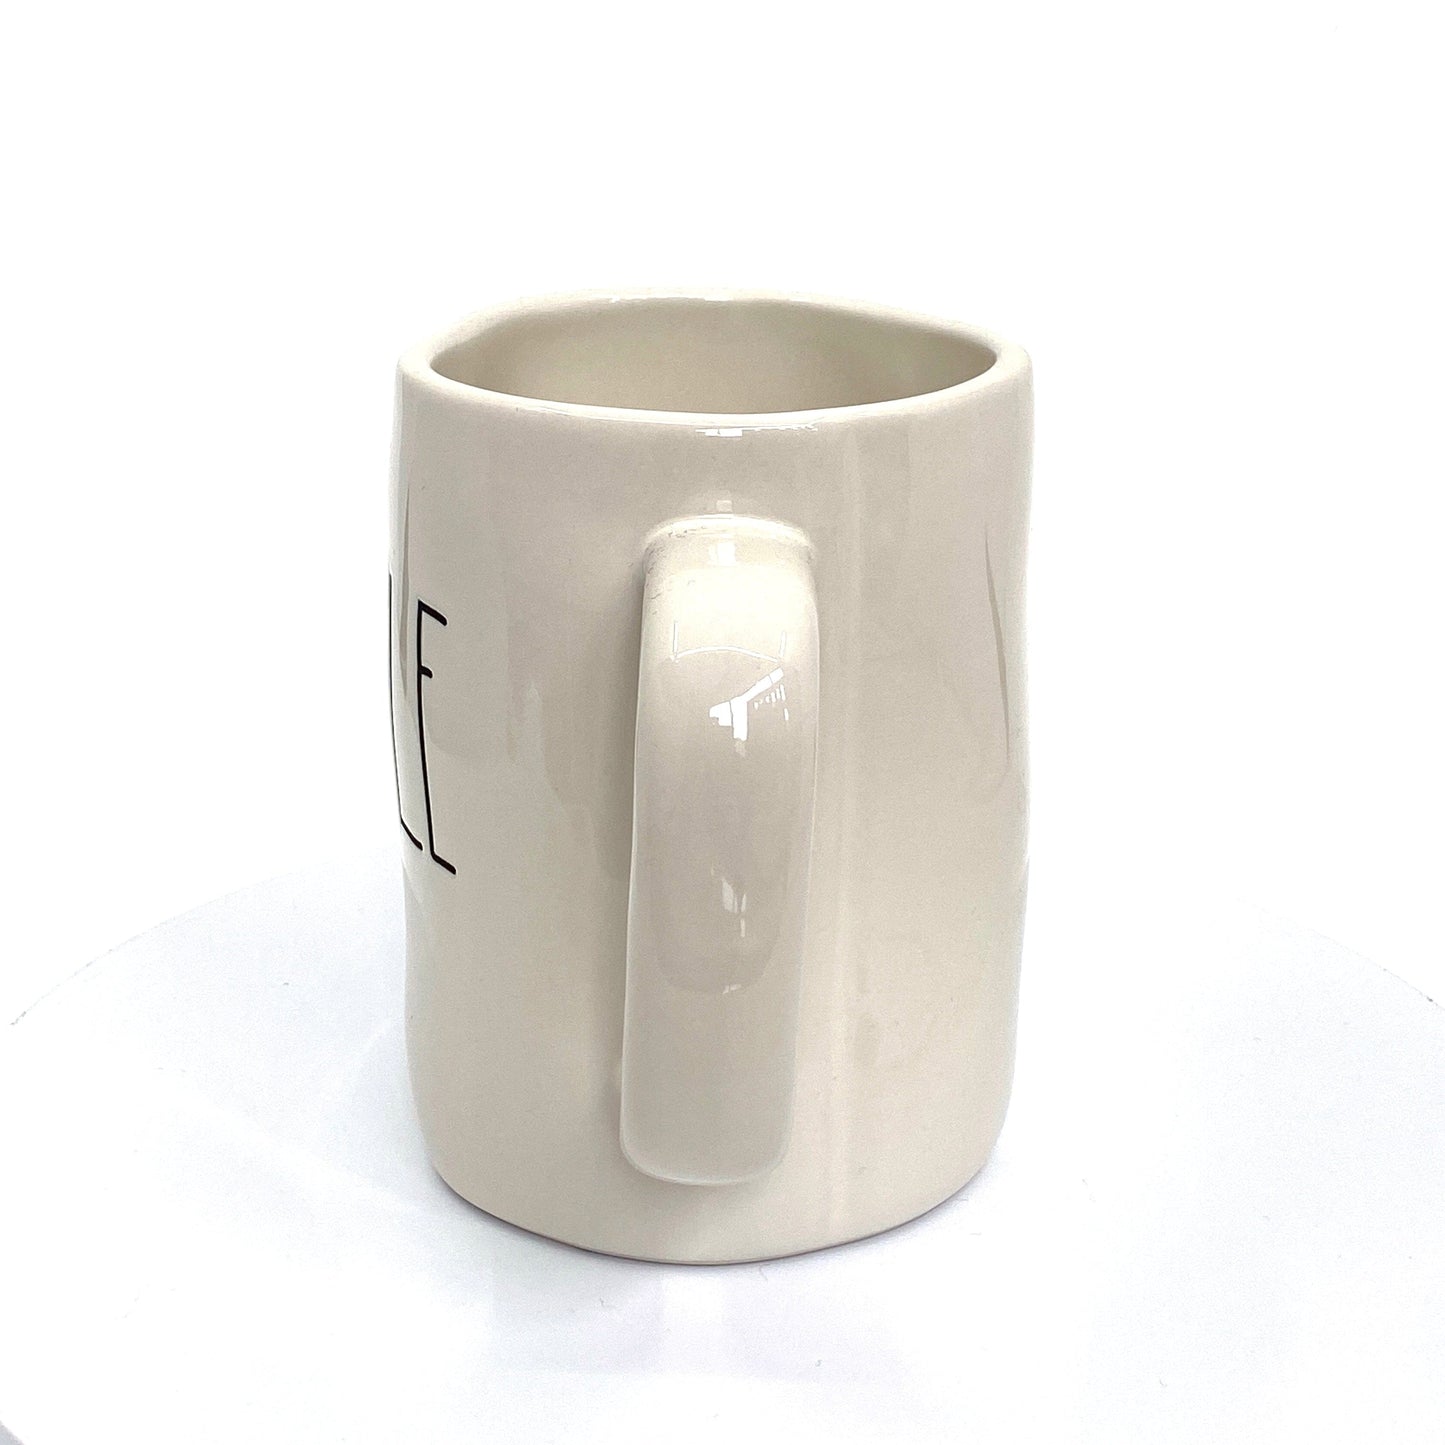 Rae Dunn Artisan Collection ‘HUSTLE’ Large Letter White Coffee Cup Mug By Magenta